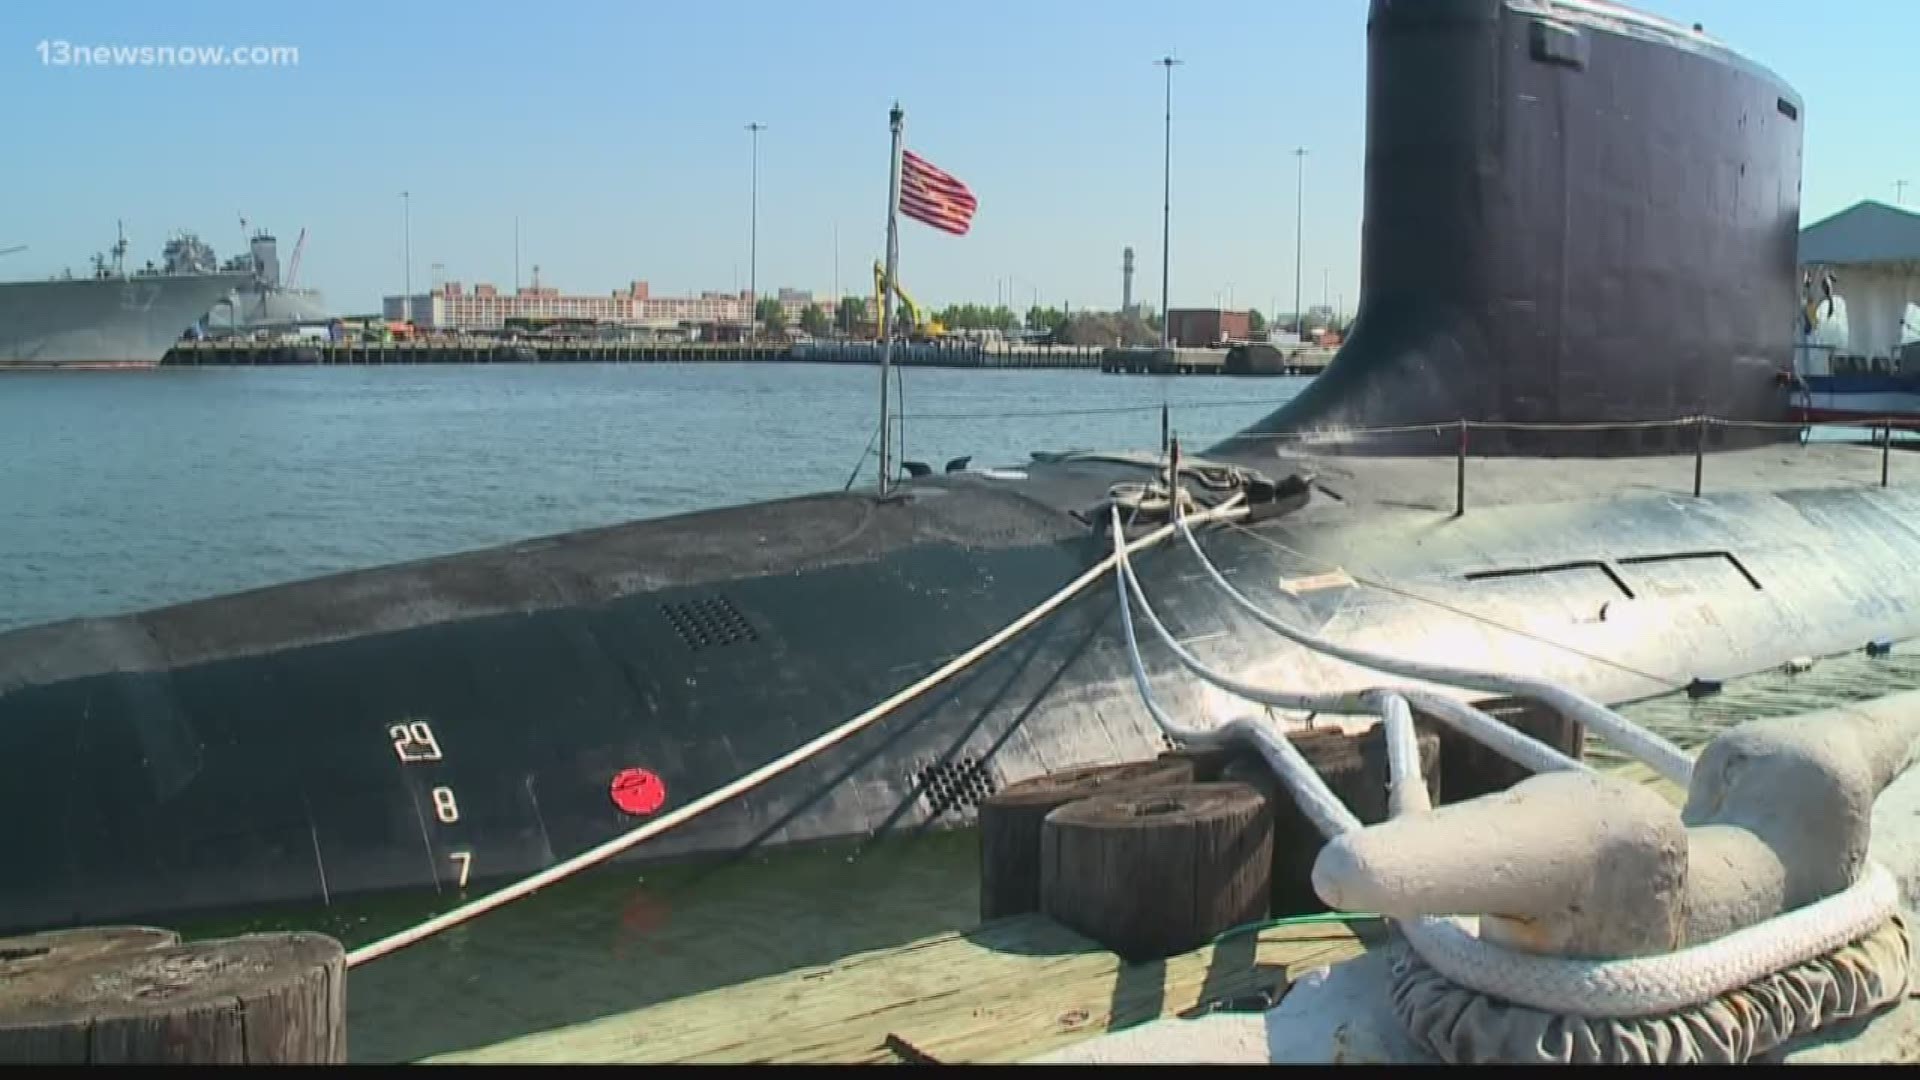 USS John Warner has a new leader, following a change of command ceremony today at Naval Station Norfolk.